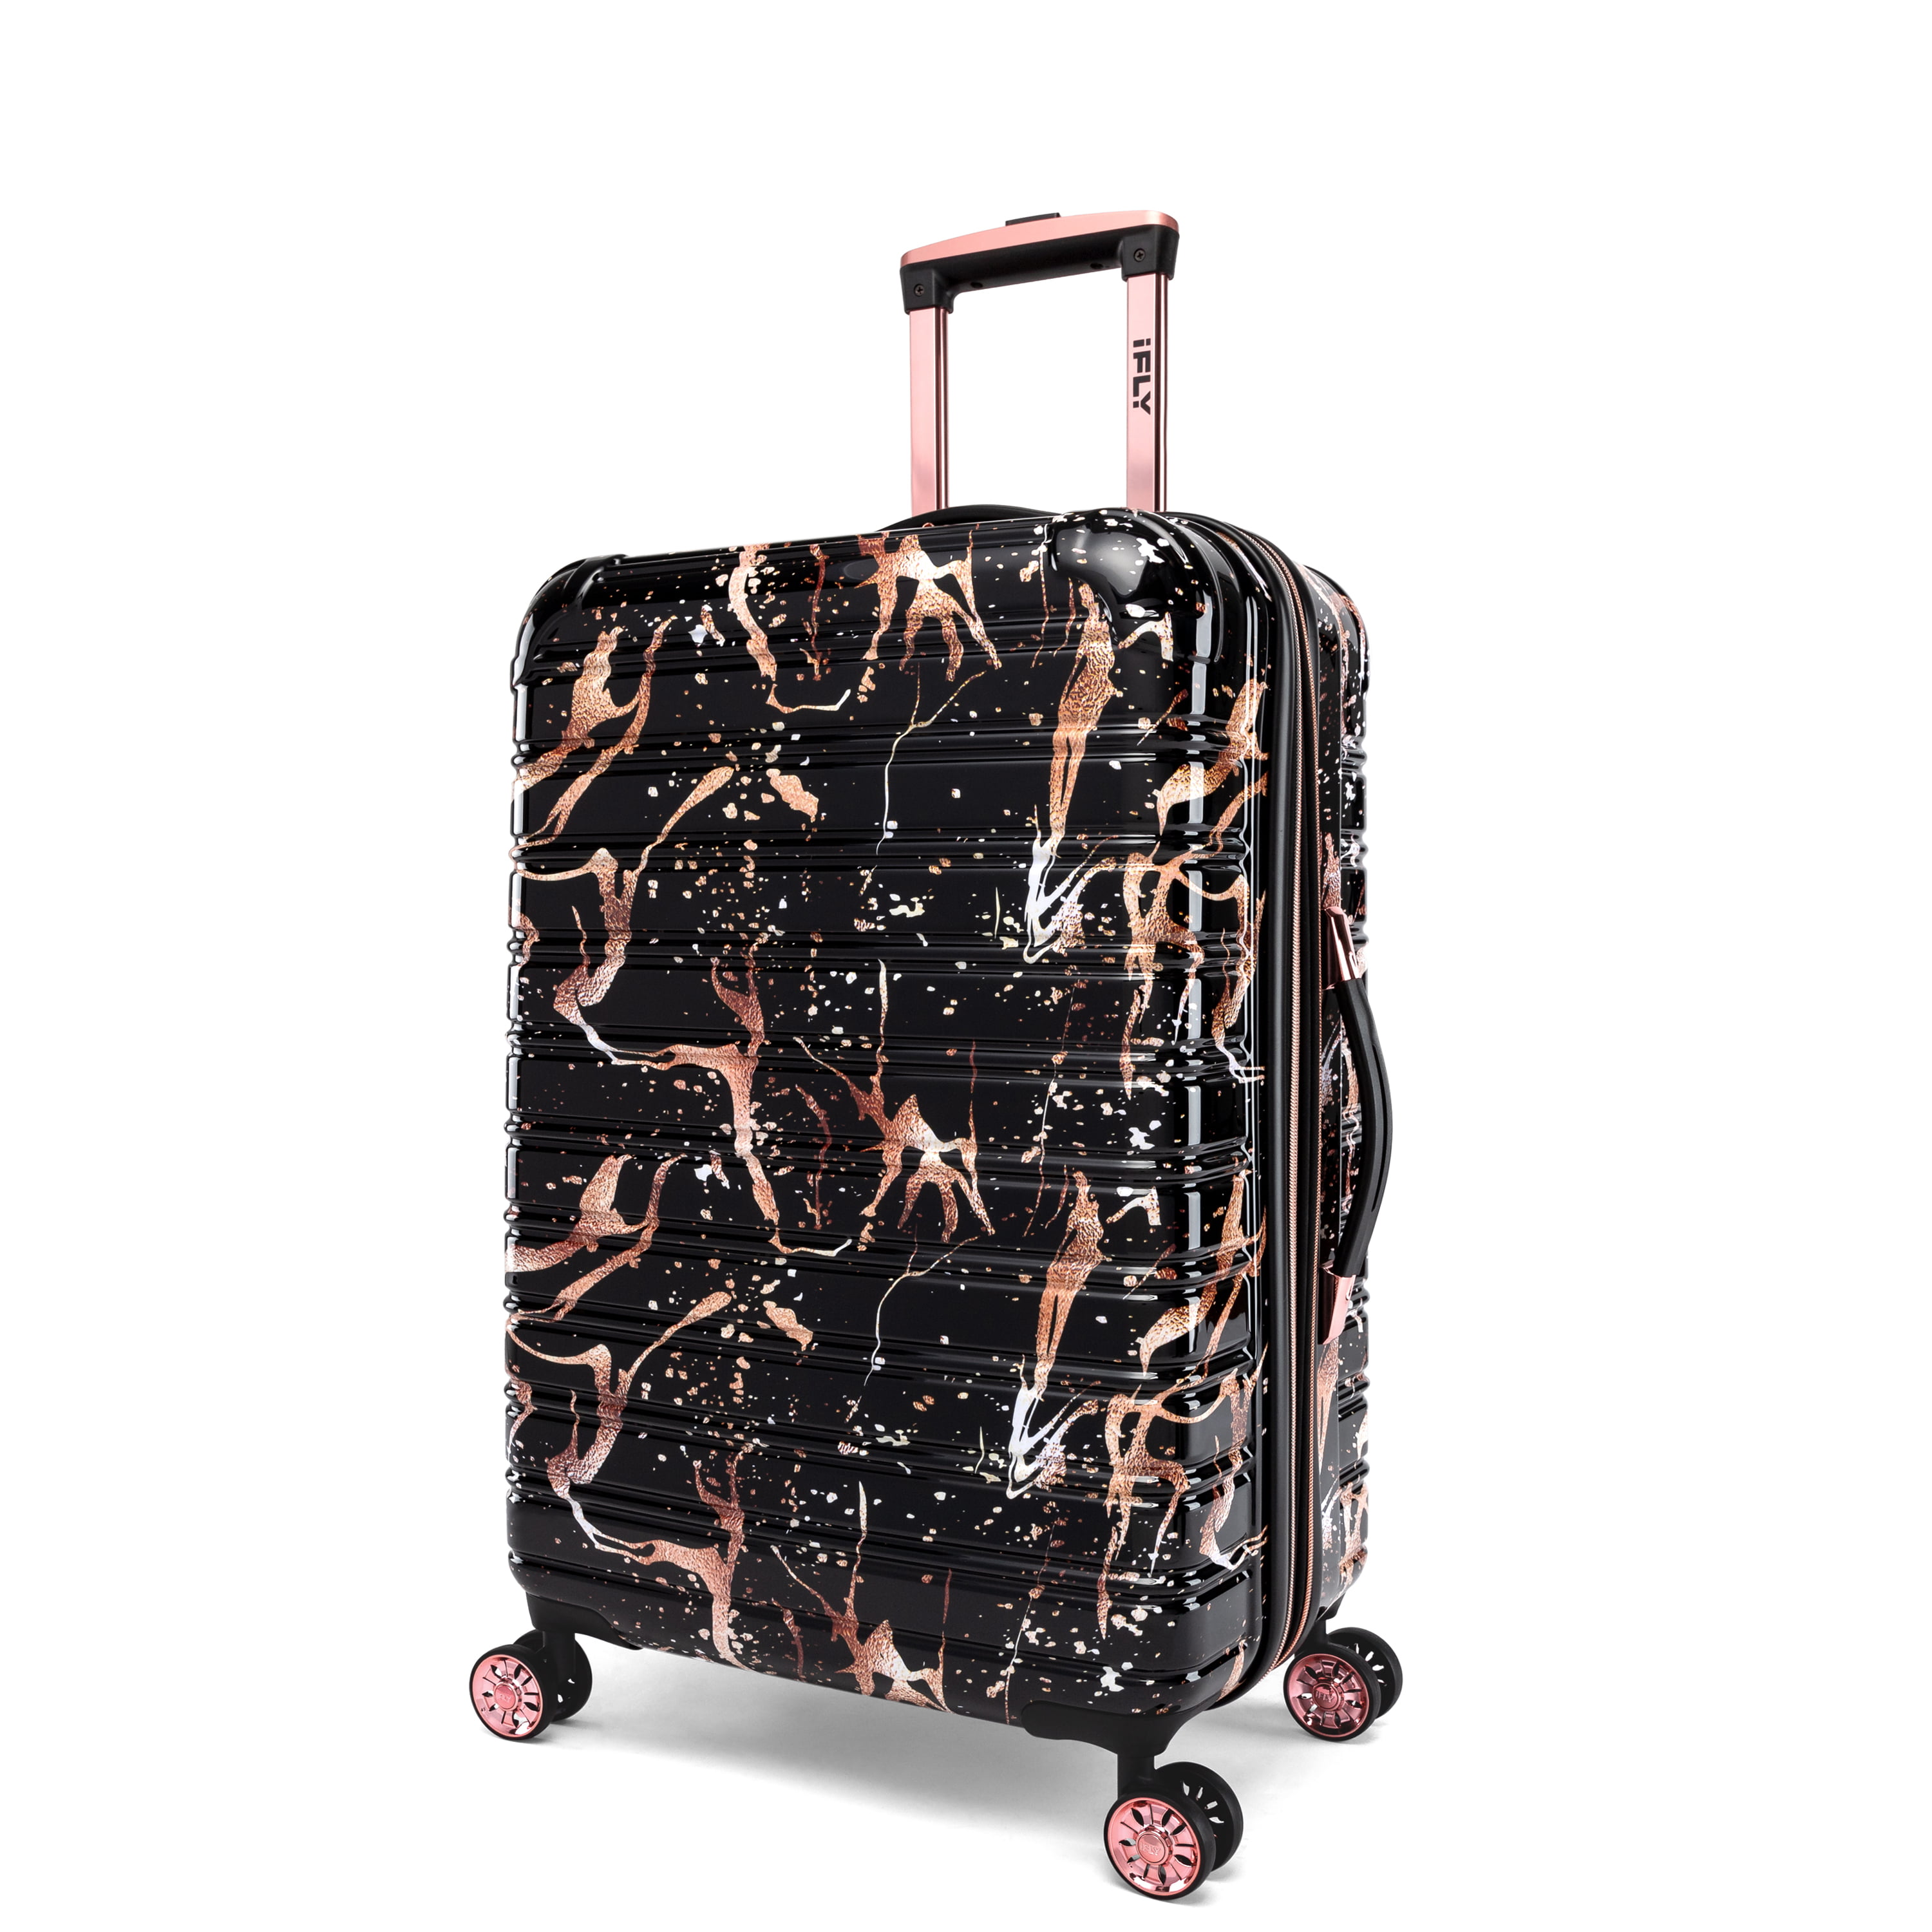 IFLY - Fibertech Black/Rose Gold Marble Hardside Luggage 20 Inch Carry-on